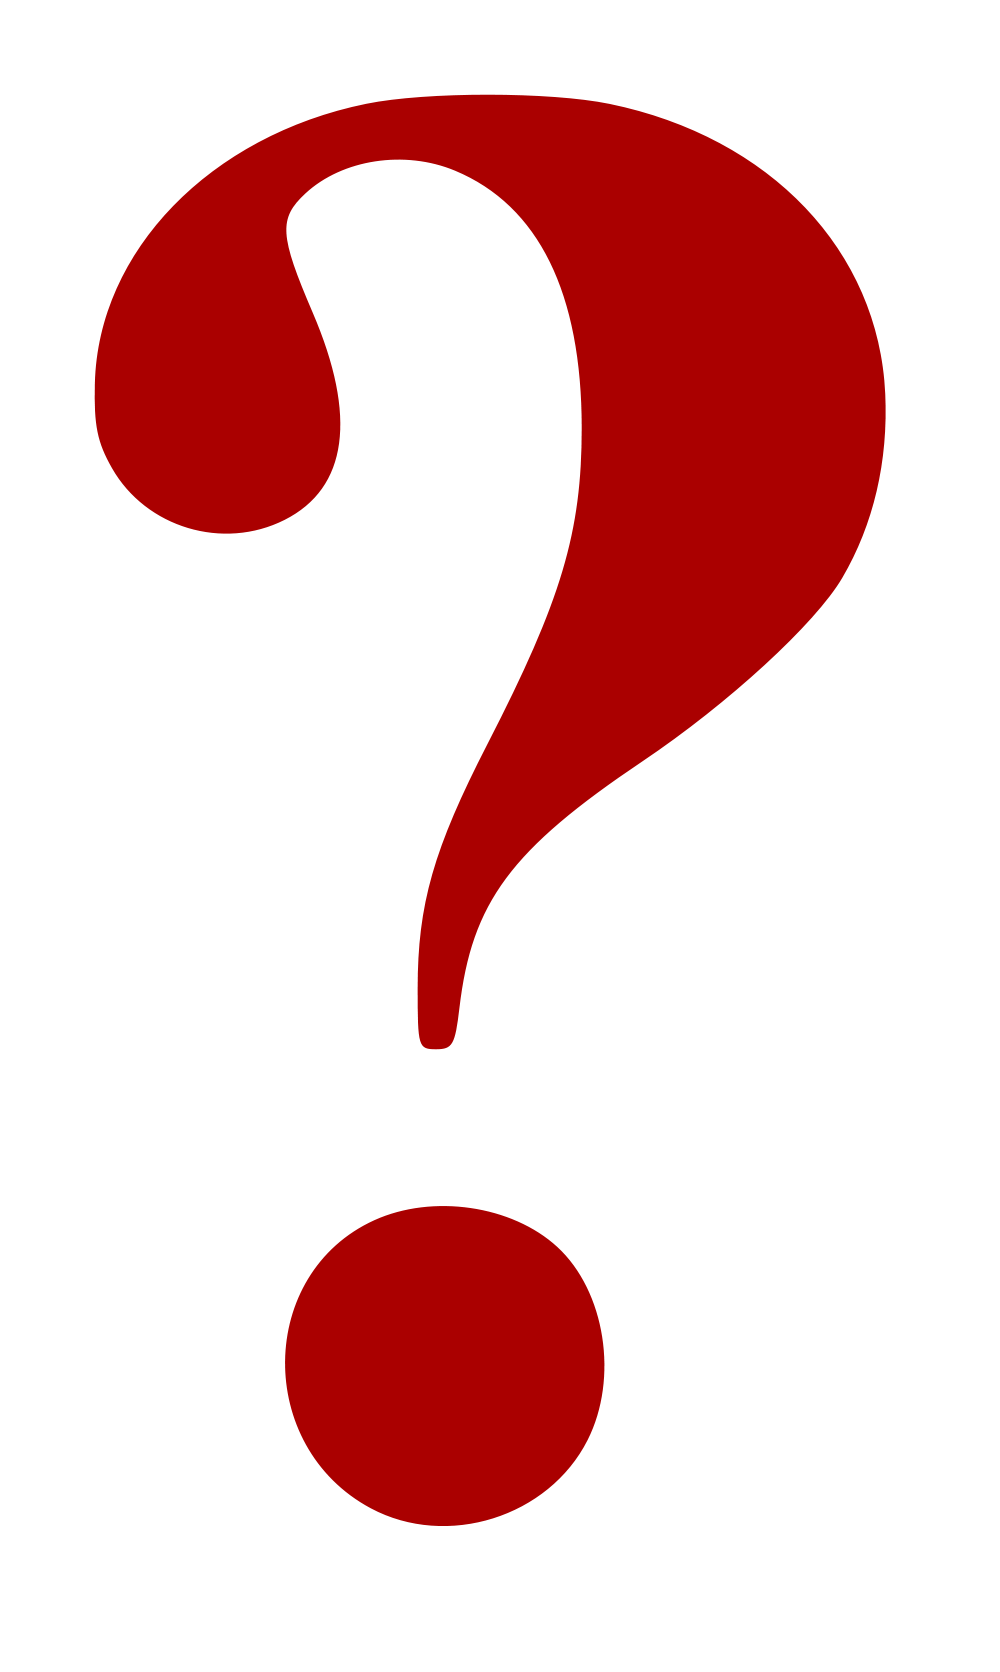 Free Question Mark, Download Free Clip Art, Free Clip Art on